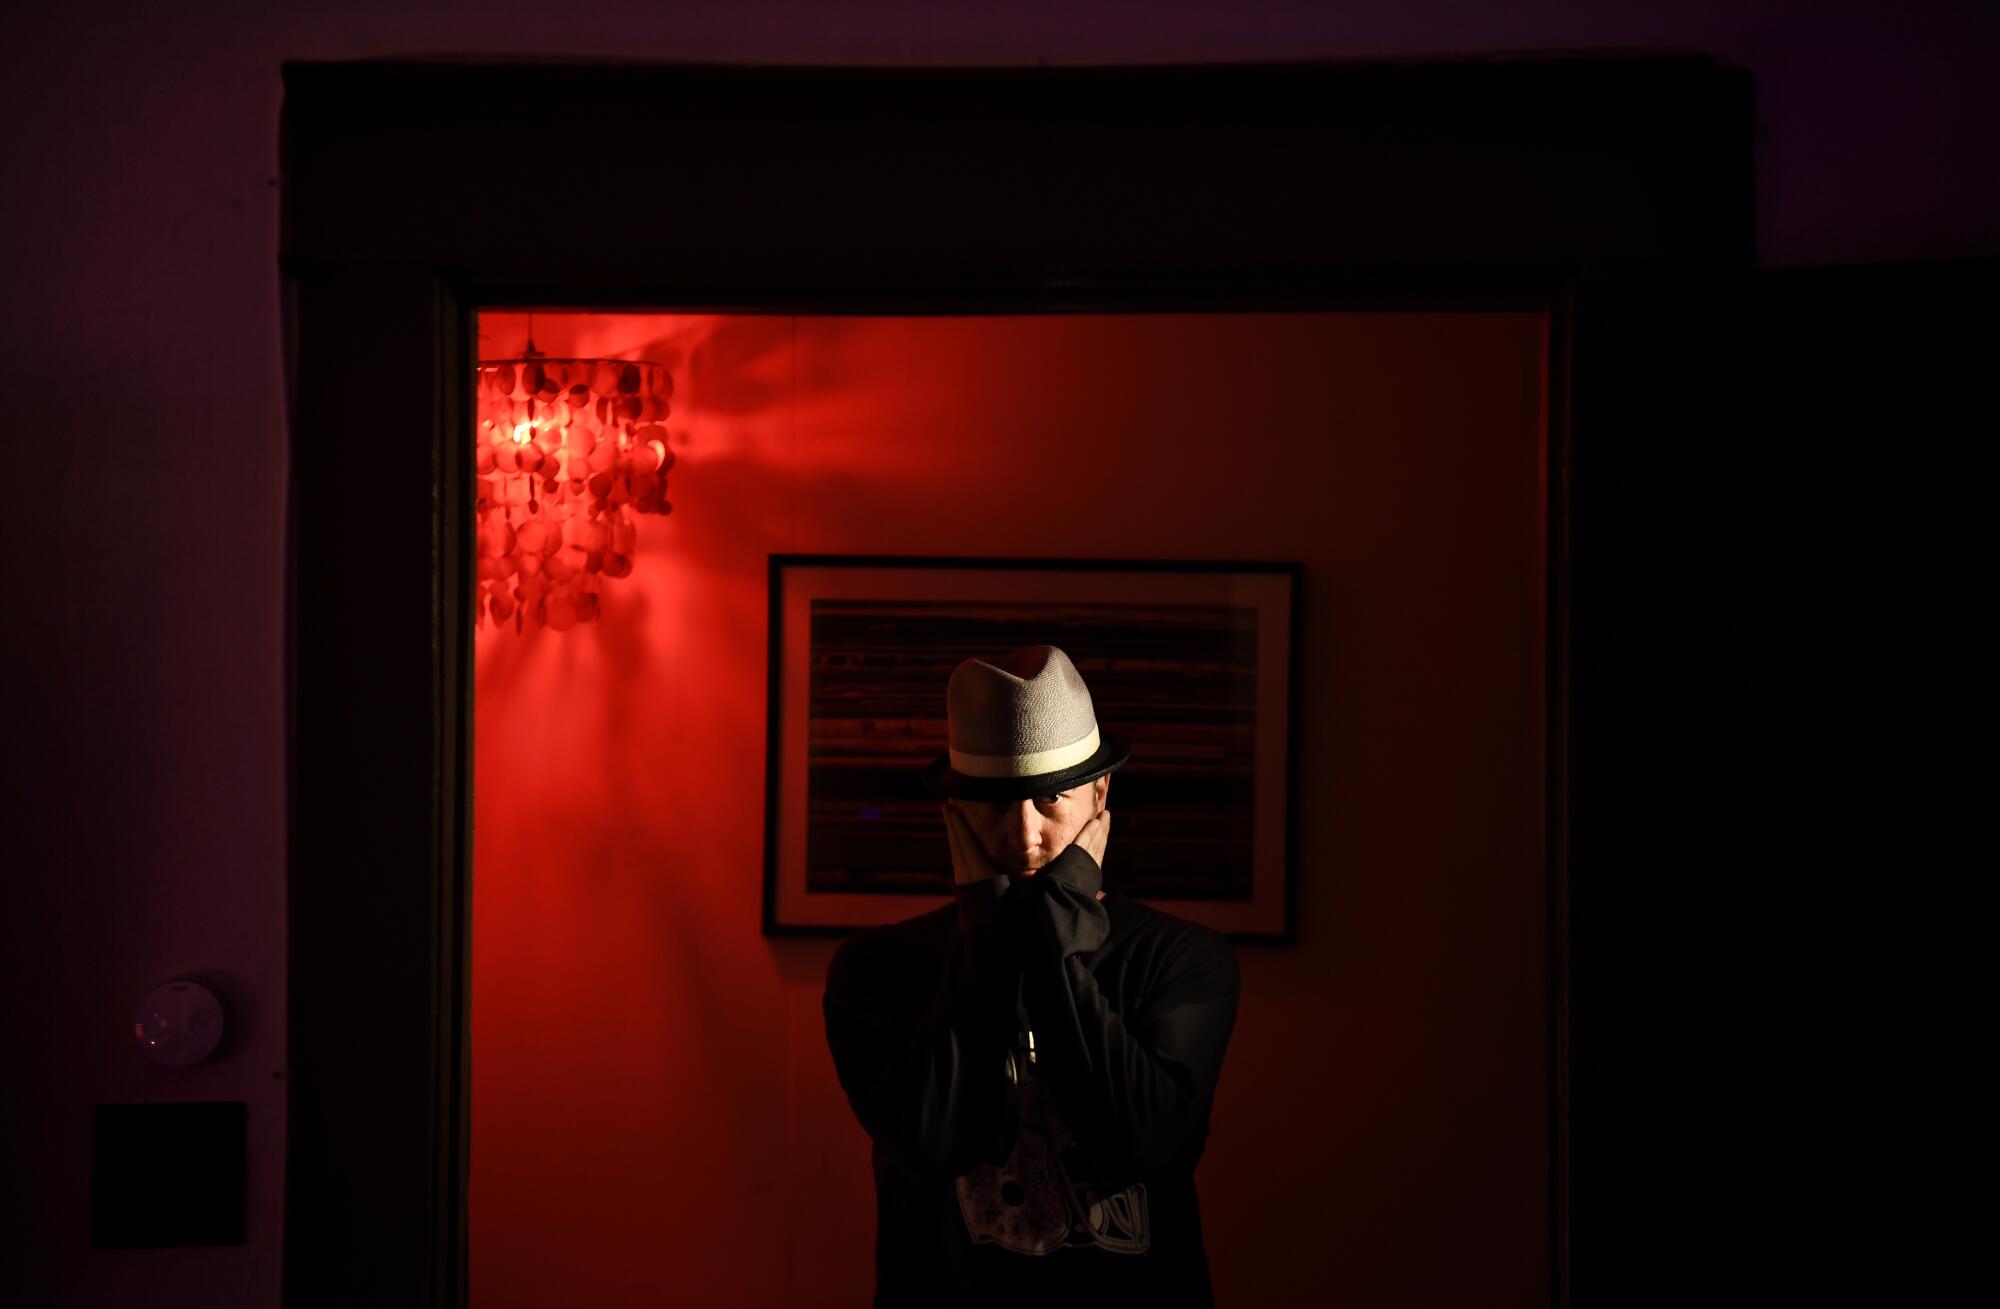 A man poses for a portrait with his hands on his face in a dark, red-lighted studio